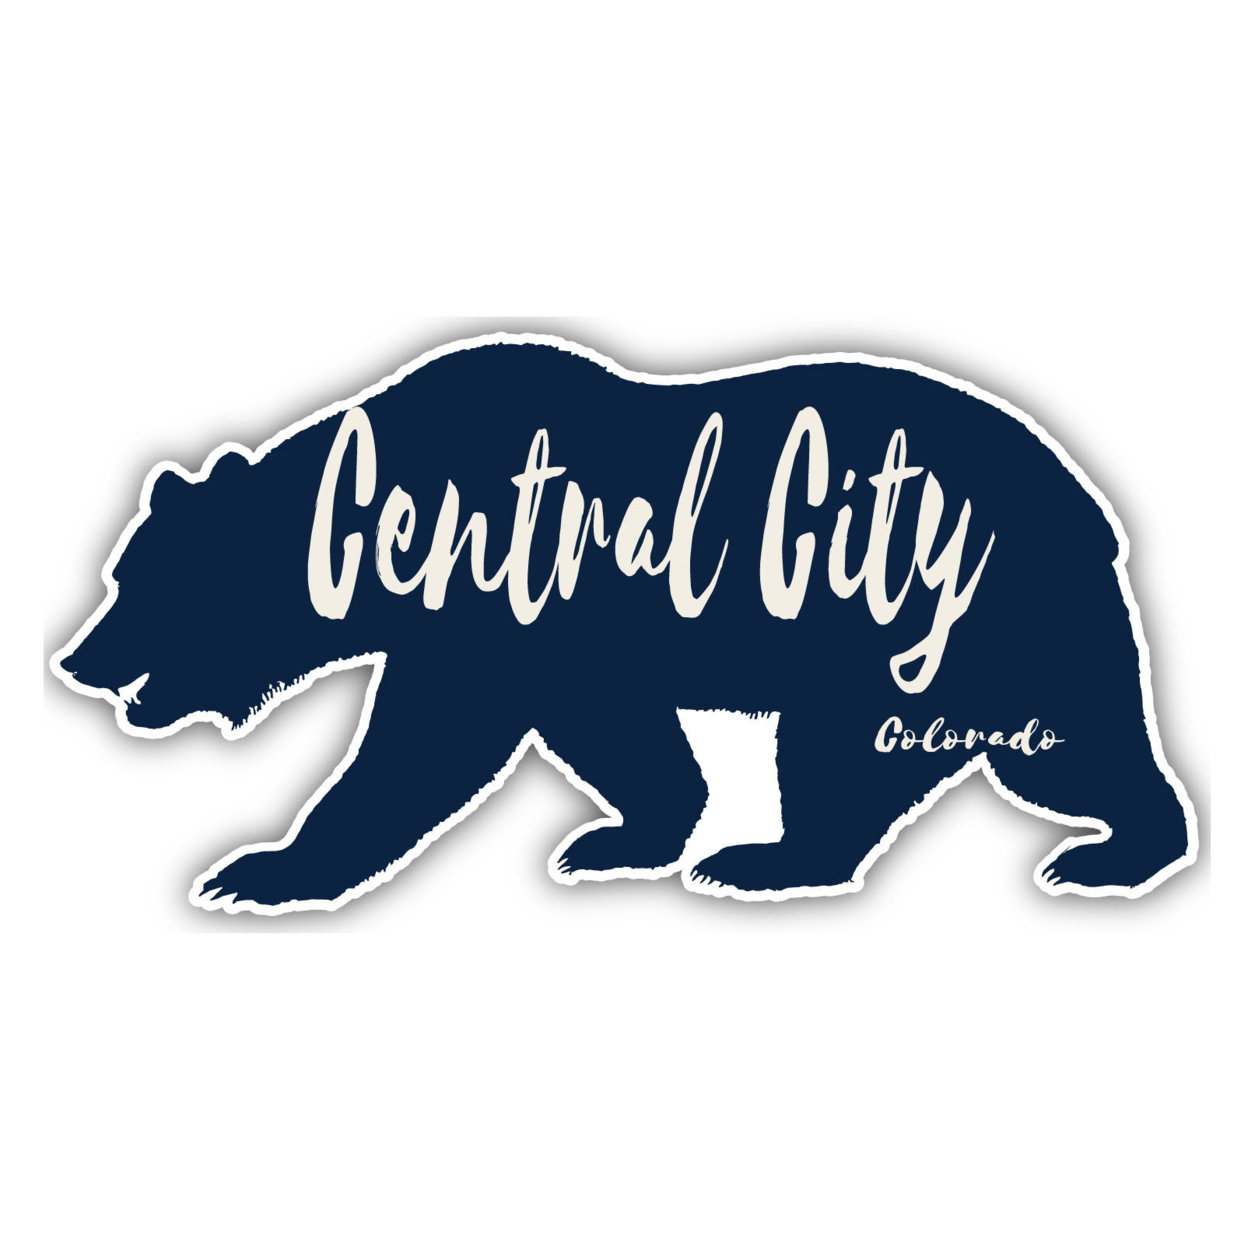 Central City Colorado Souvenir Decorative Stickers (Choose Theme And Size) - 4-Pack, 12-Inch, Tent